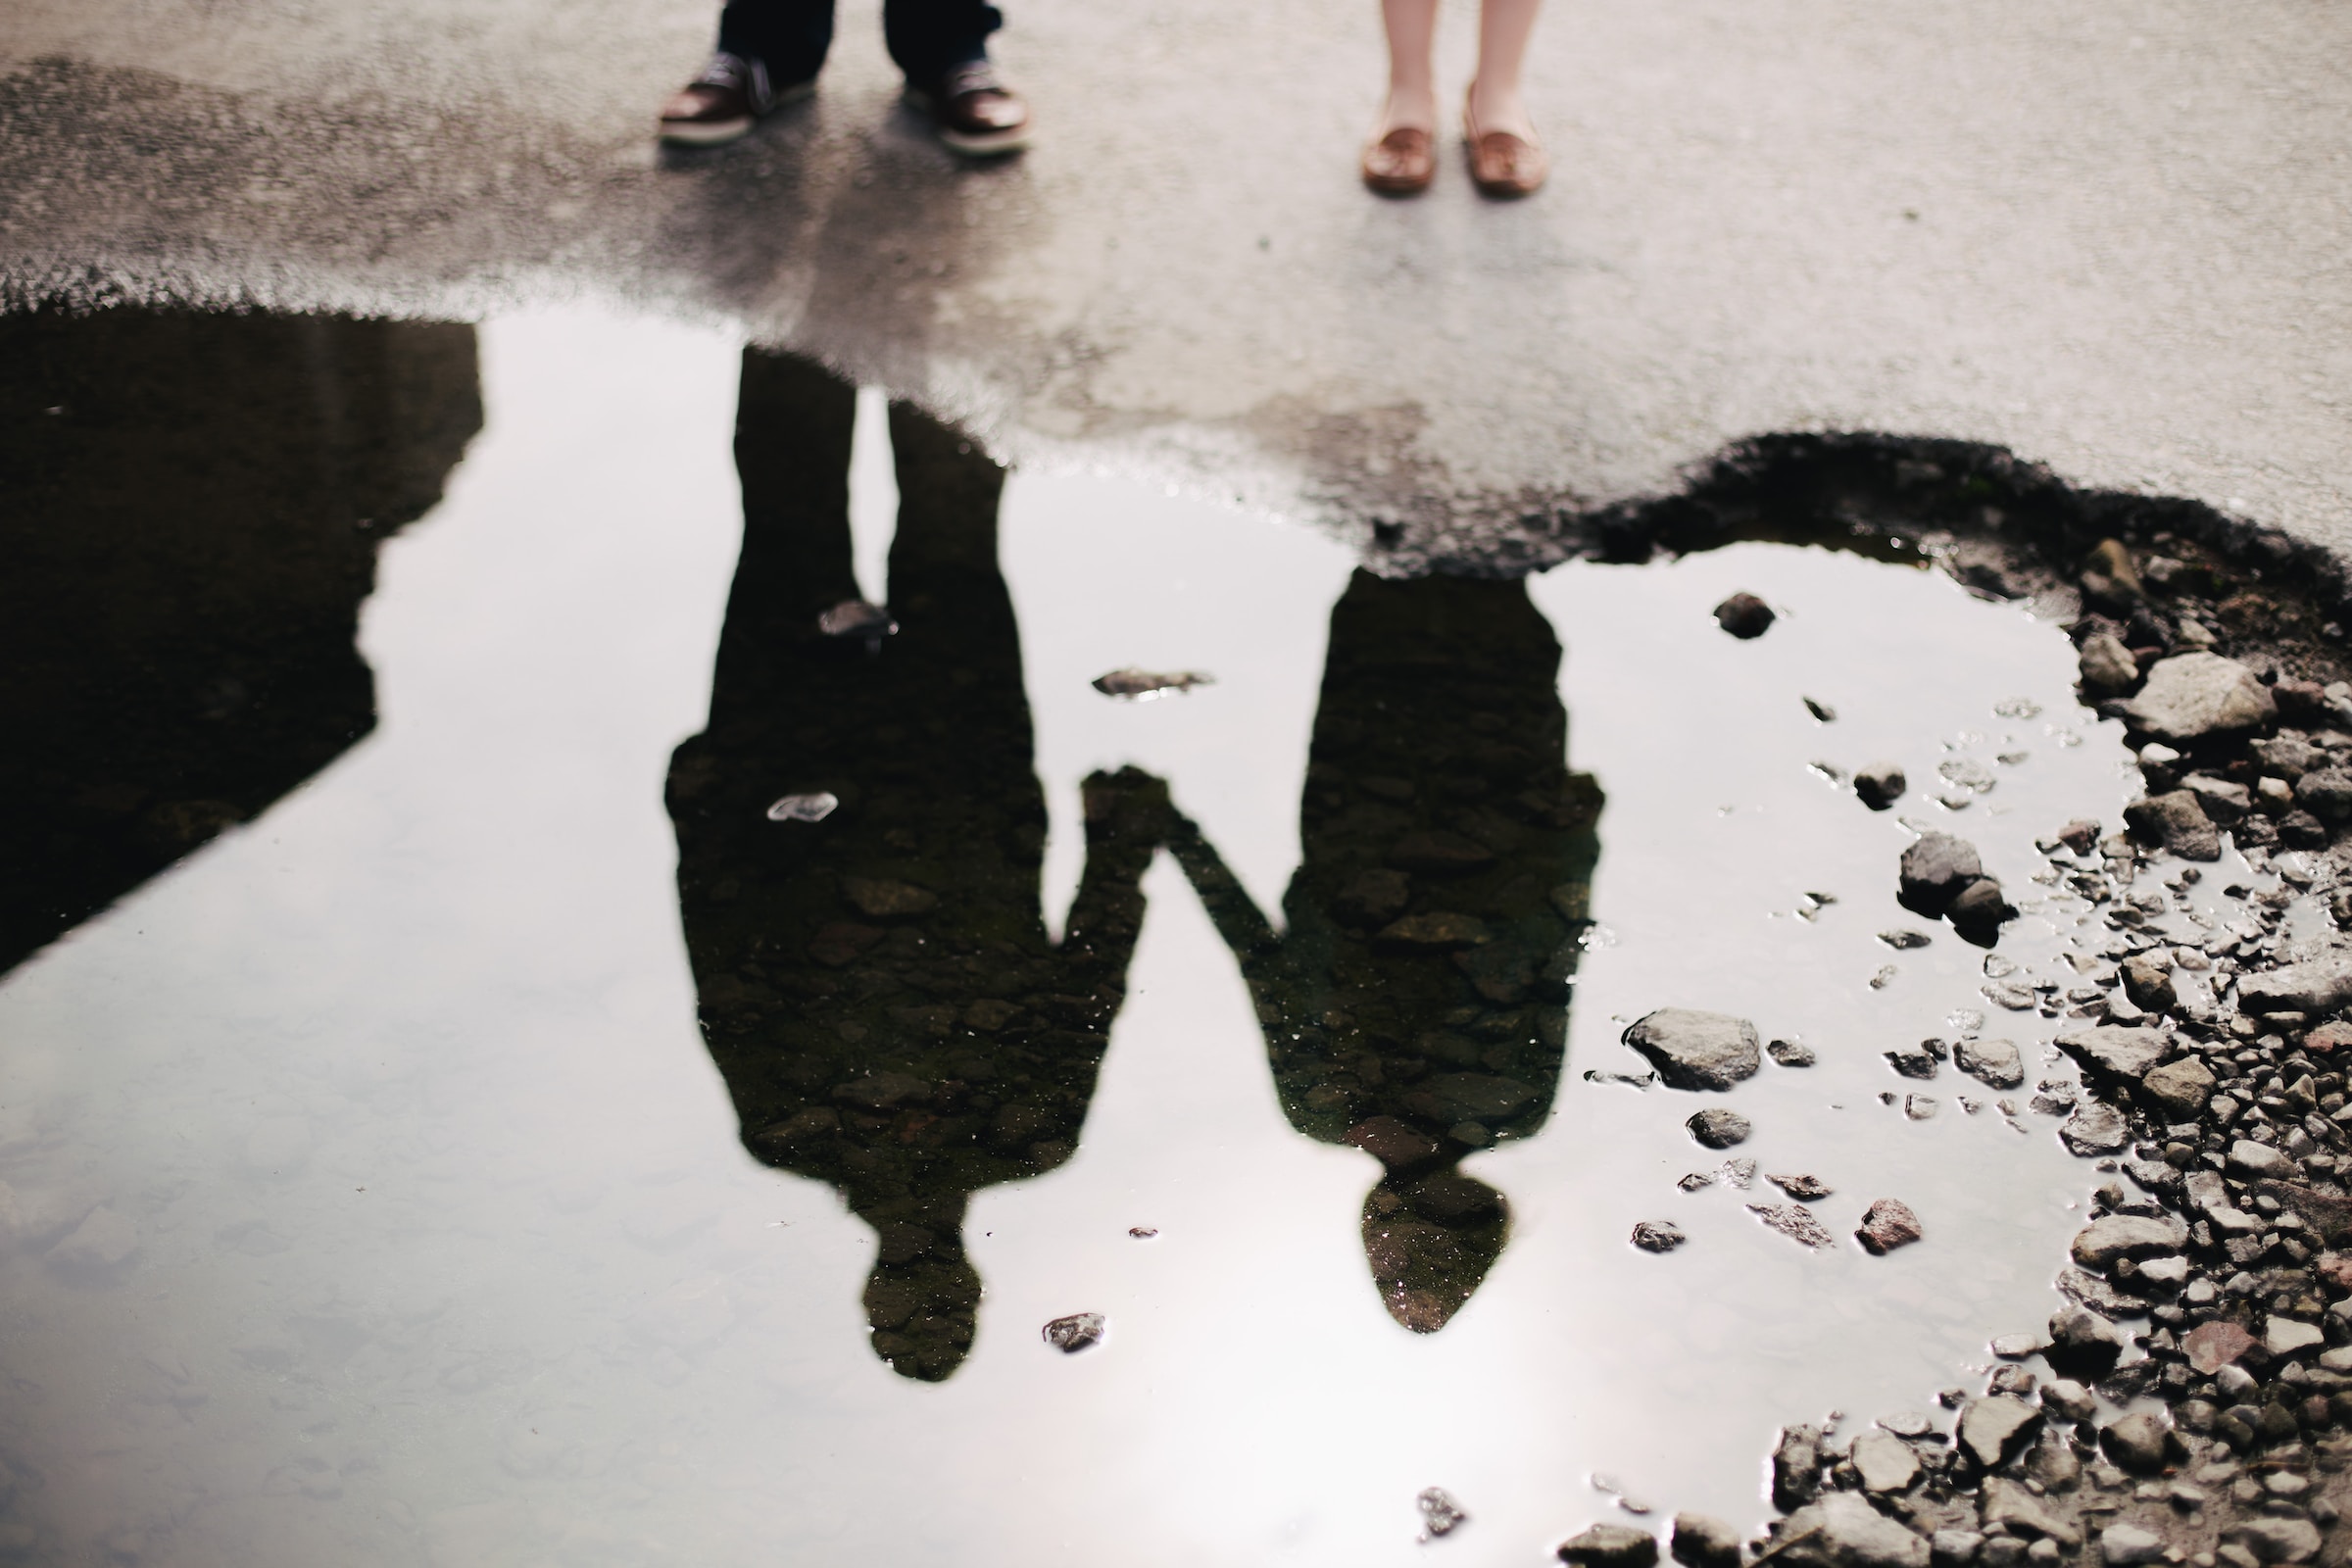 The reflection of two people standing near water holding hands.